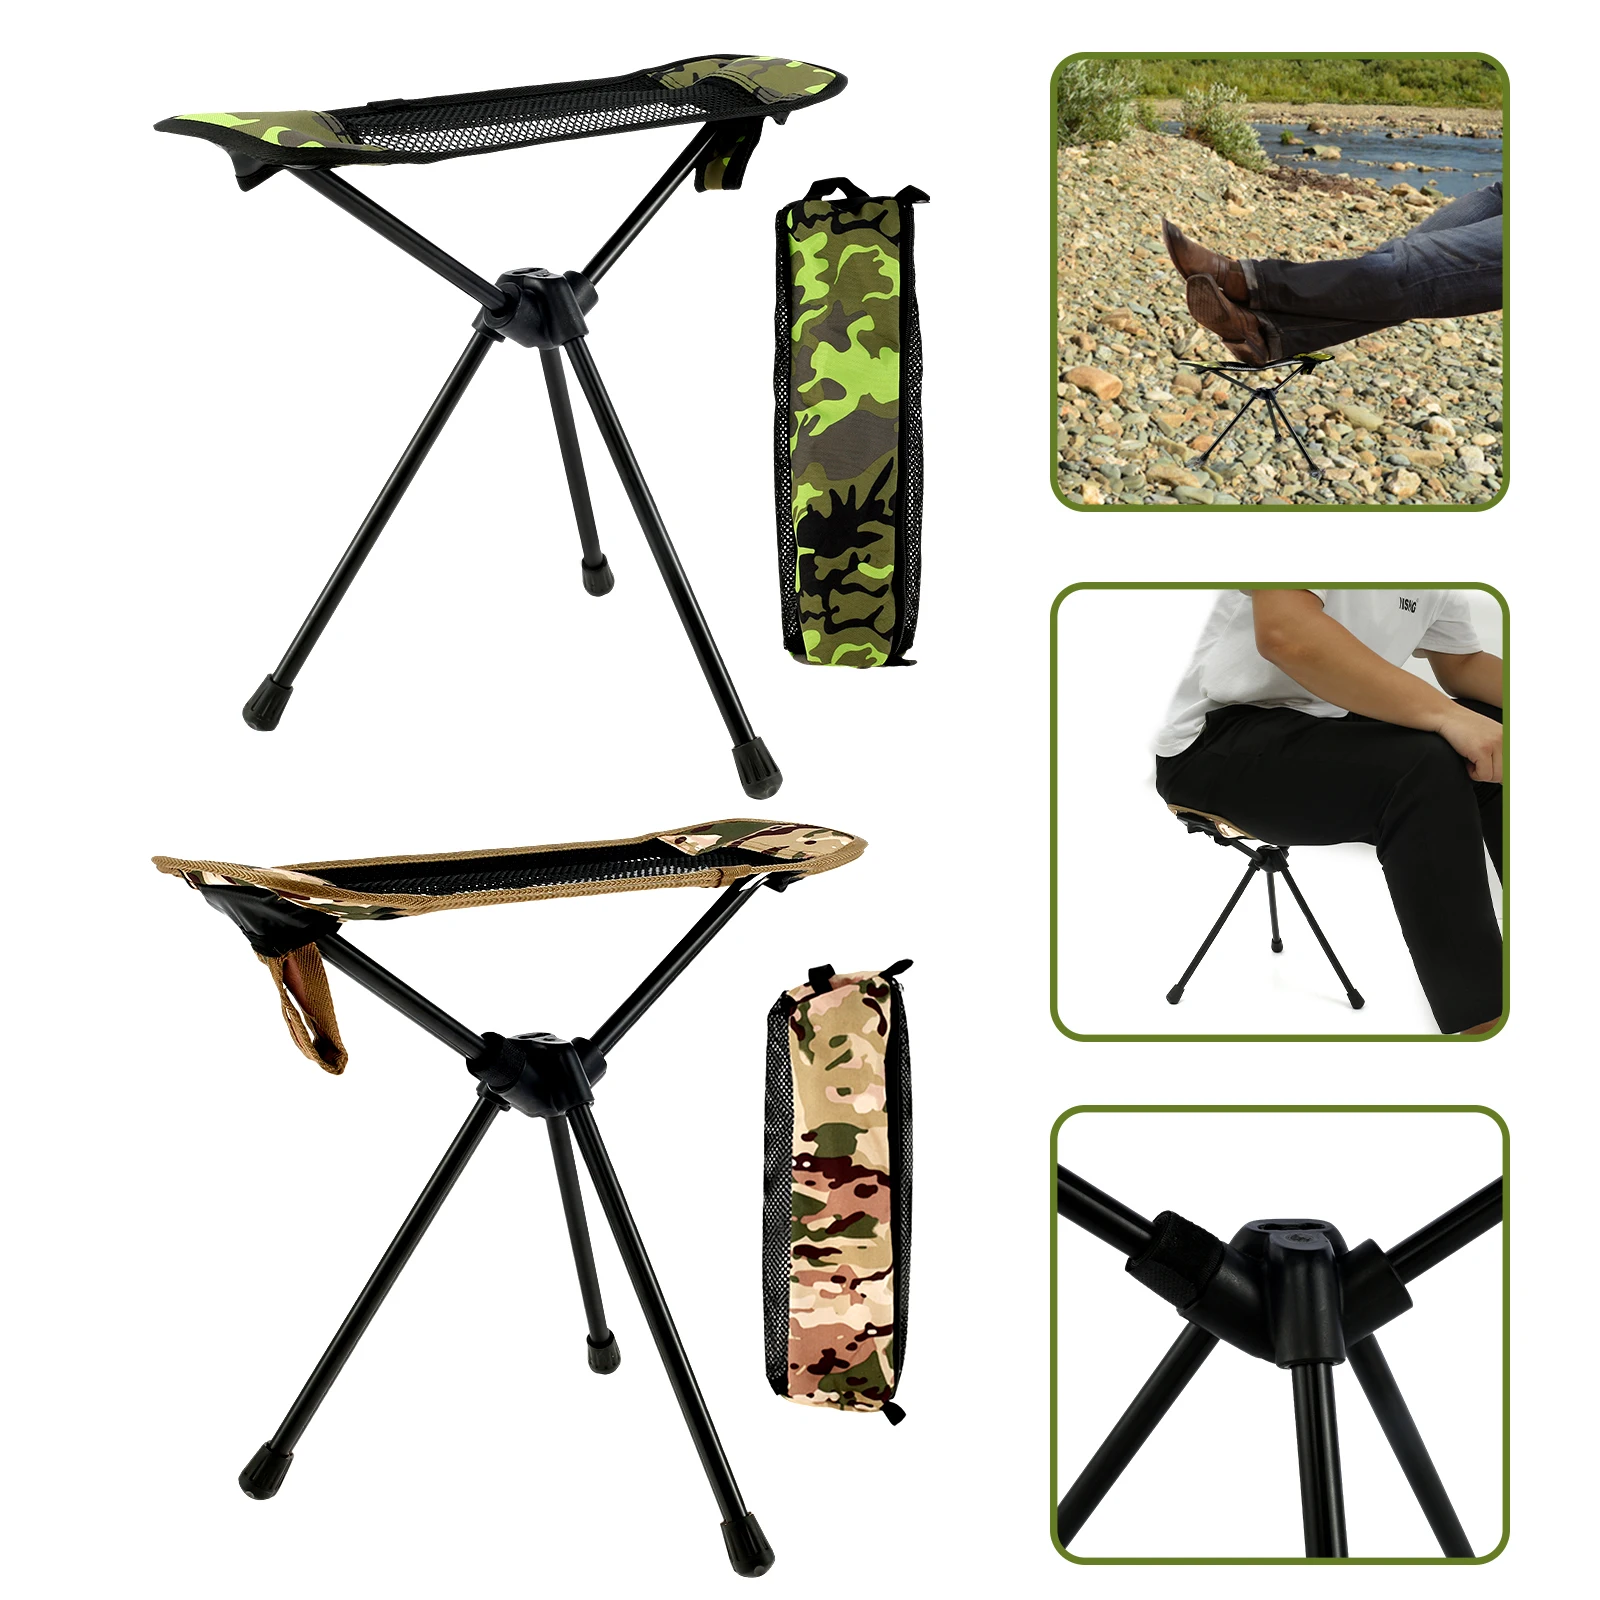 

Portable Foldable Camping Chair Moon Chair Camping Footrest Breathable Footrest Chair for Swing Beach Fishing Outdoor Furniture